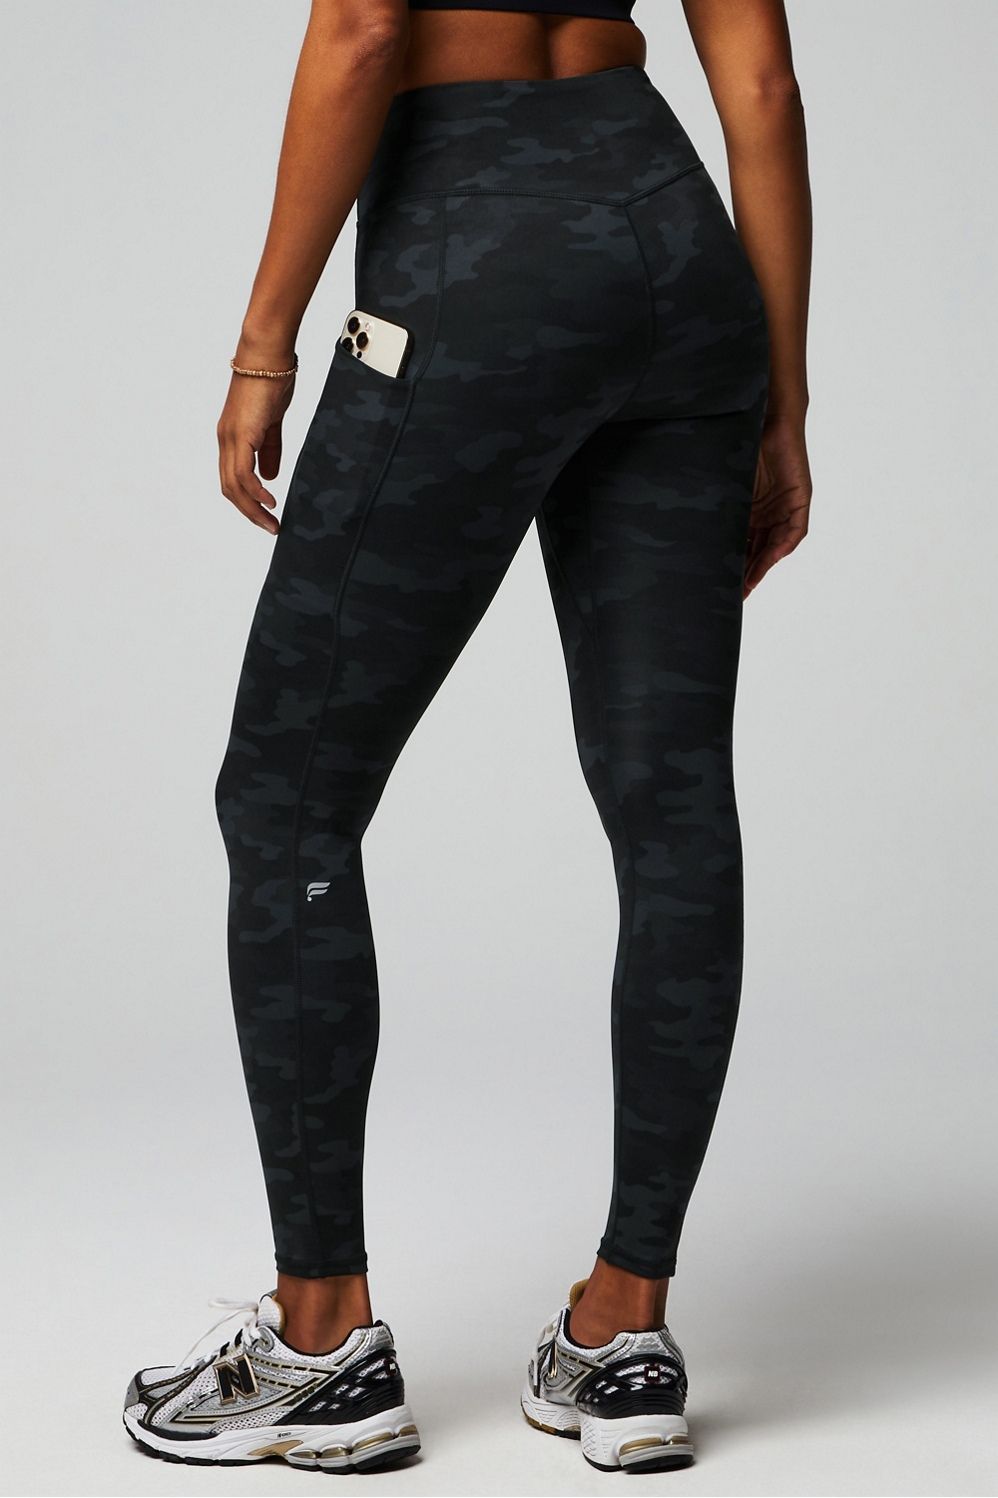 Anywhere Motion365+ High-Waisted Pocket Legging | Fabletics - North America